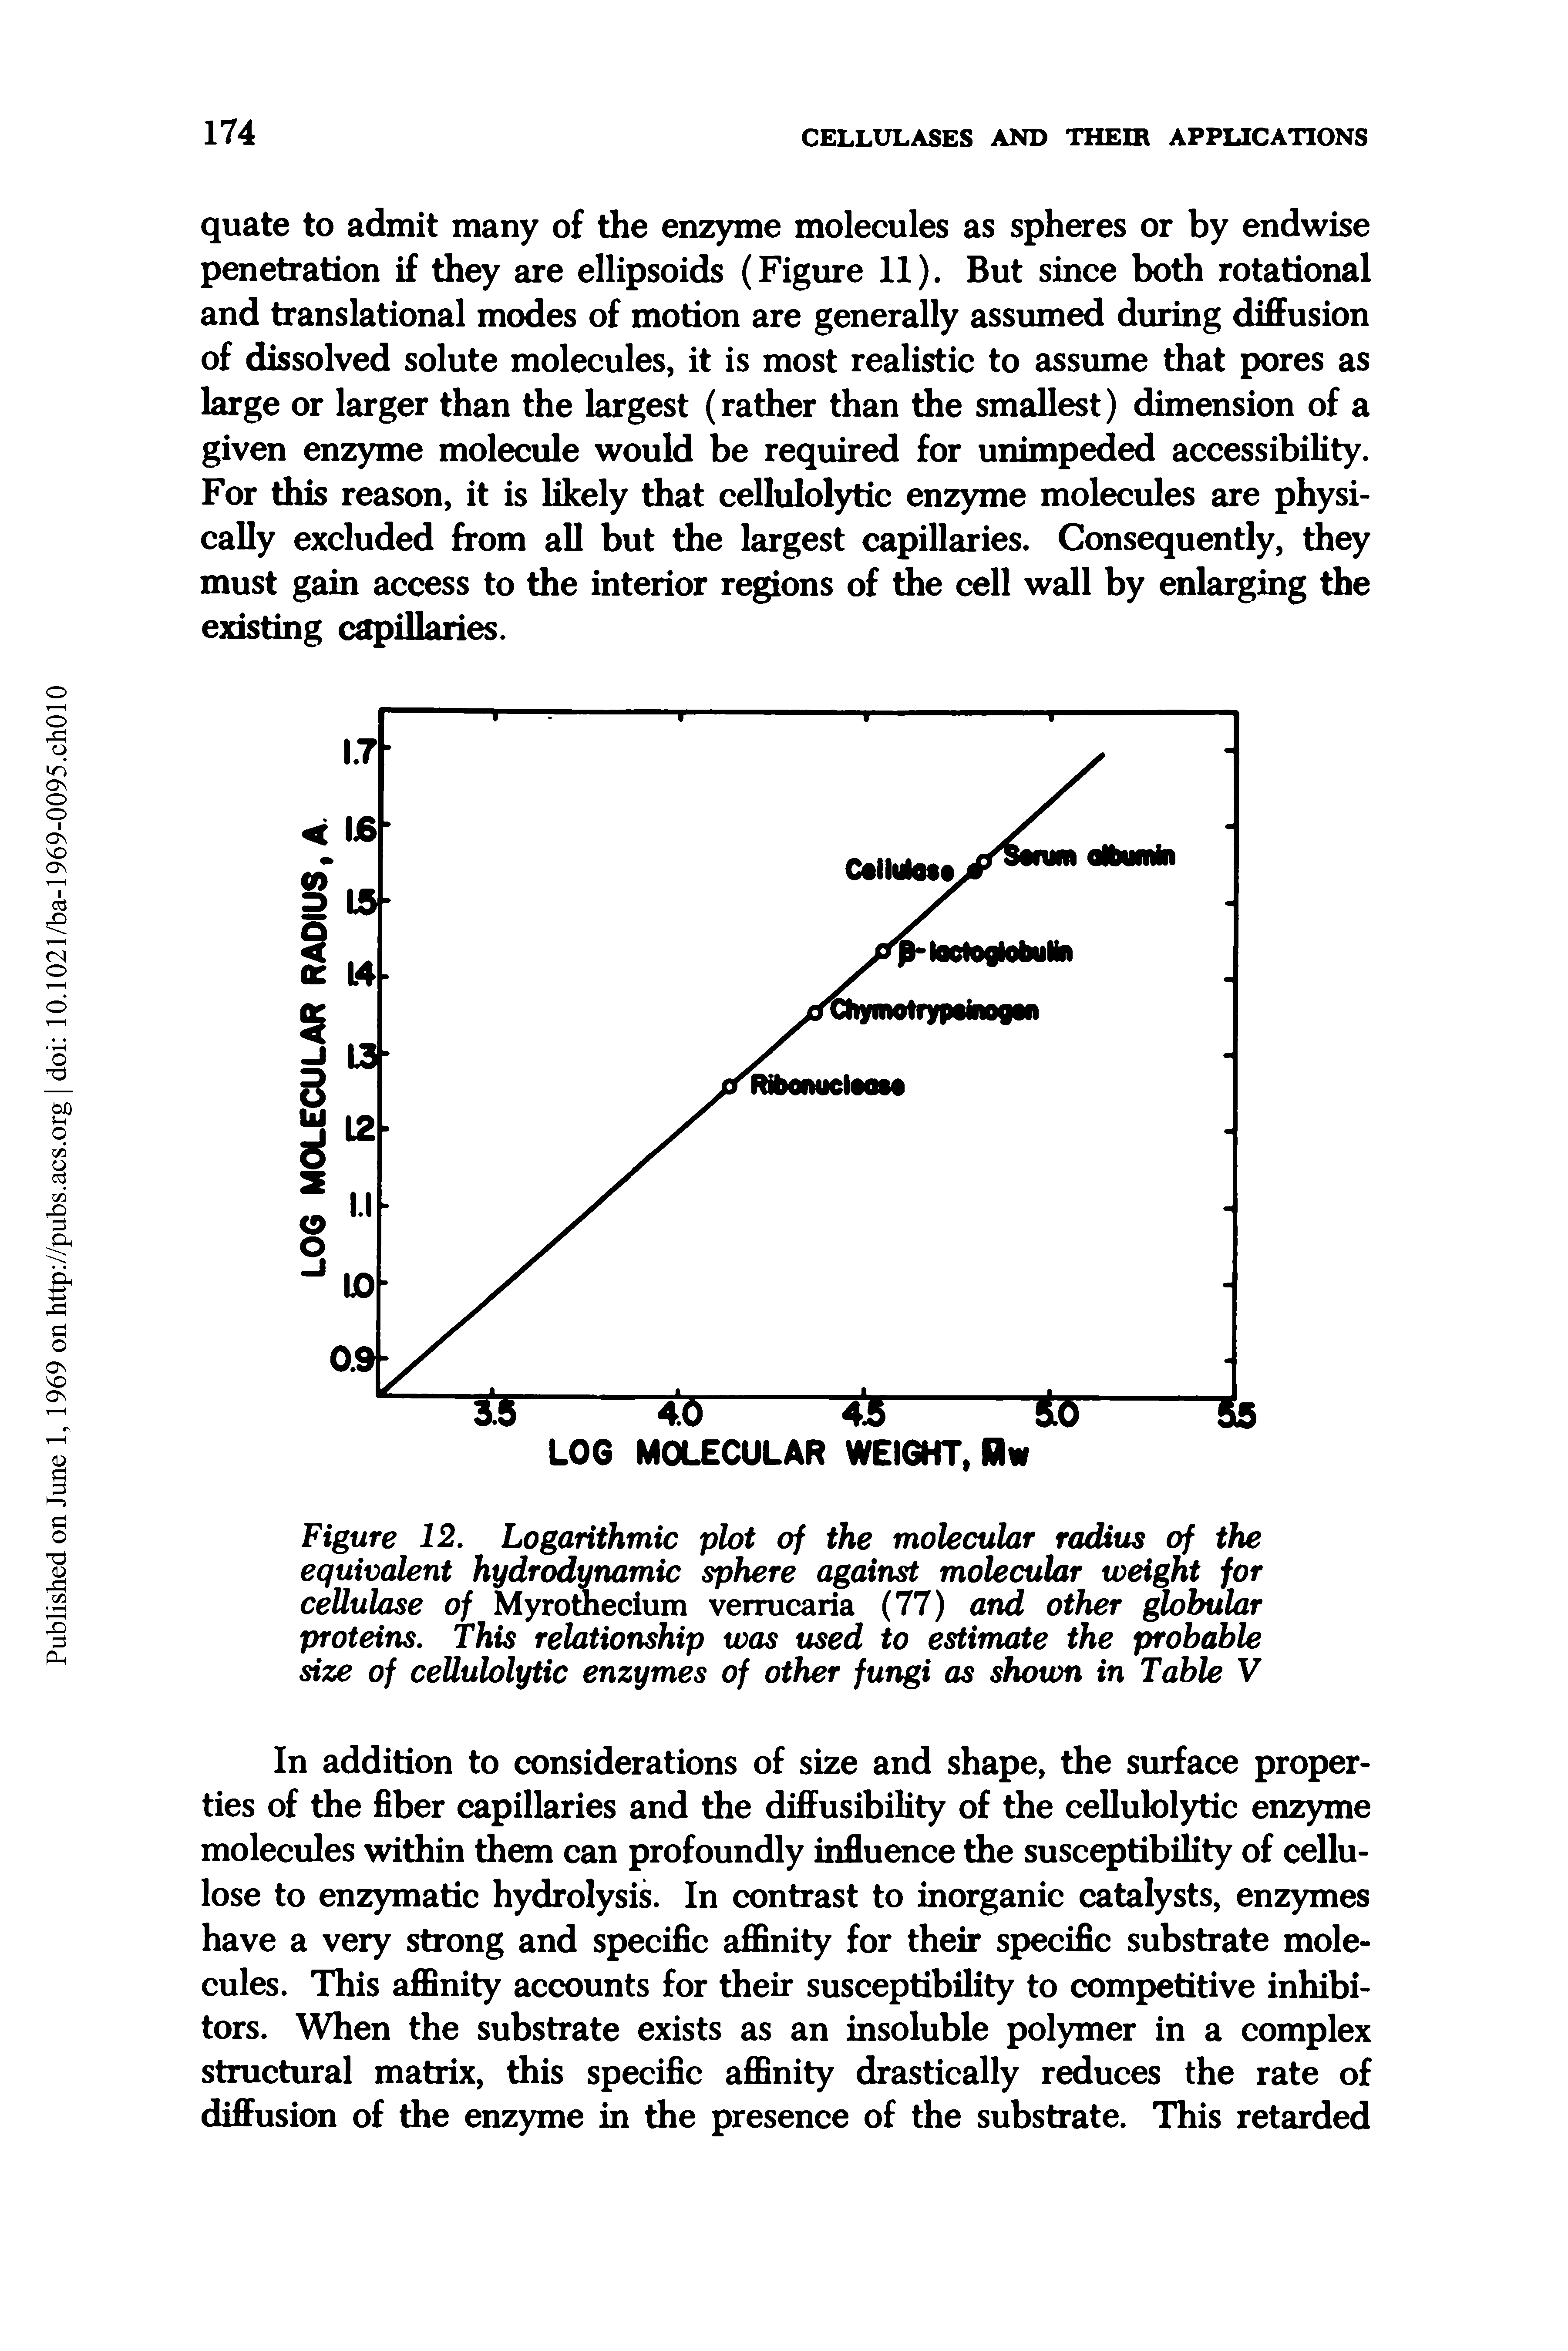 Figure 12. Logarithmic plot of the molecular radius of the equivalent hydrodynamic sphere against molecular weight for cellulose of Myrothecium verrucaria (77) and other globular proteins. This relationship was used to estimate the probable size of cellulolytic enzymes of other fungi as shown in Table V...